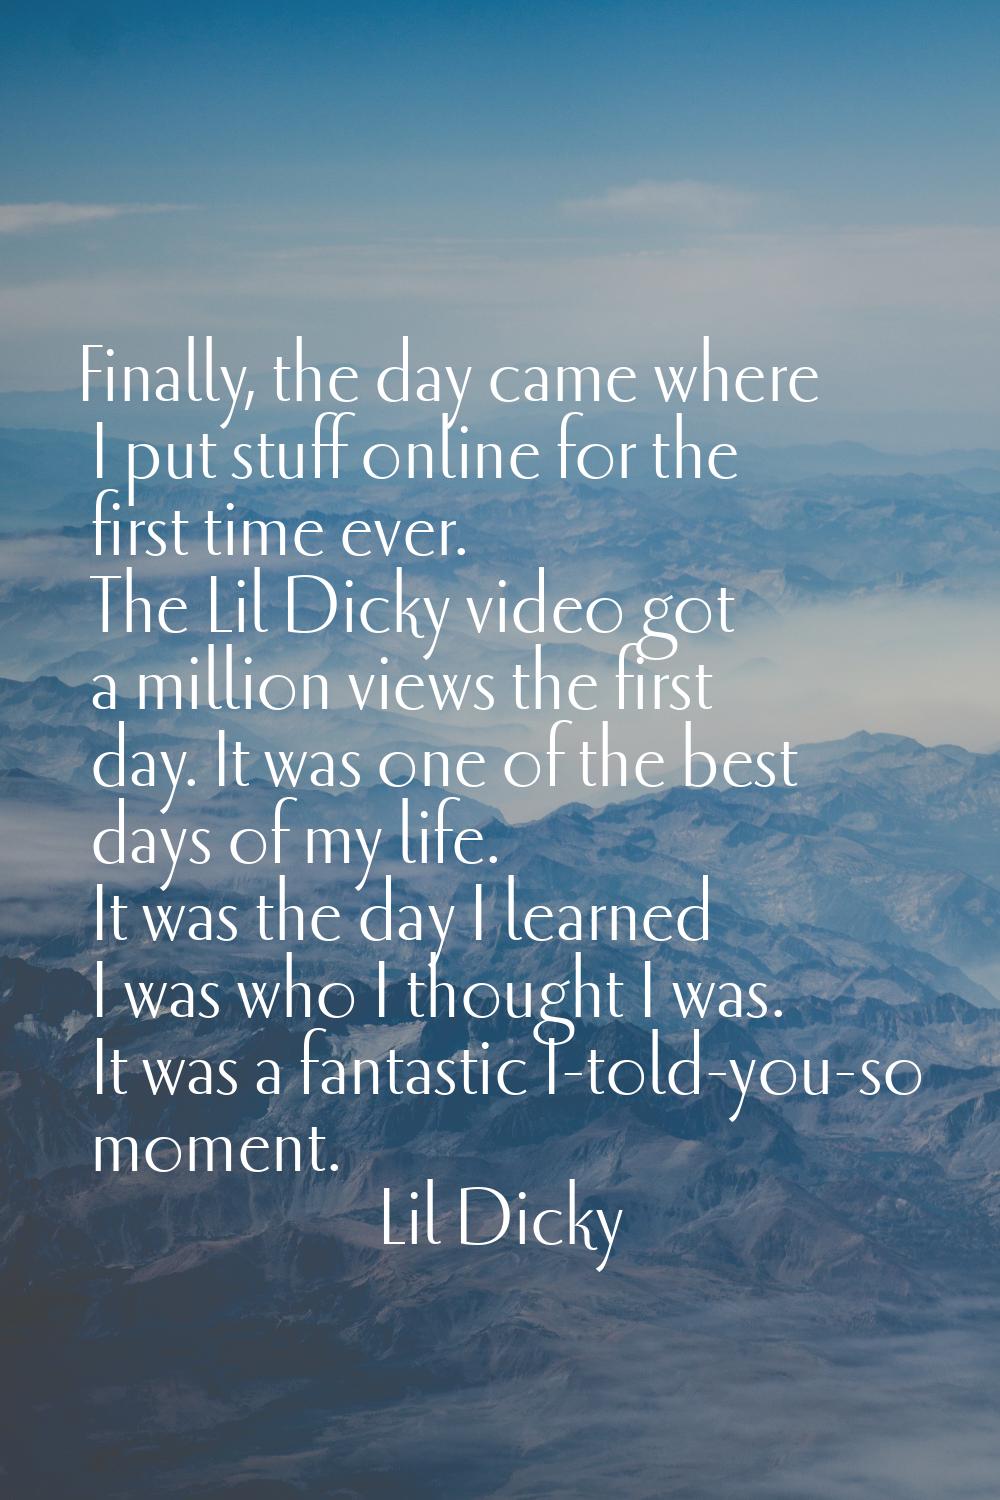 Finally, the day came where I put stuff online for the first time ever. The Lil Dicky video got a m